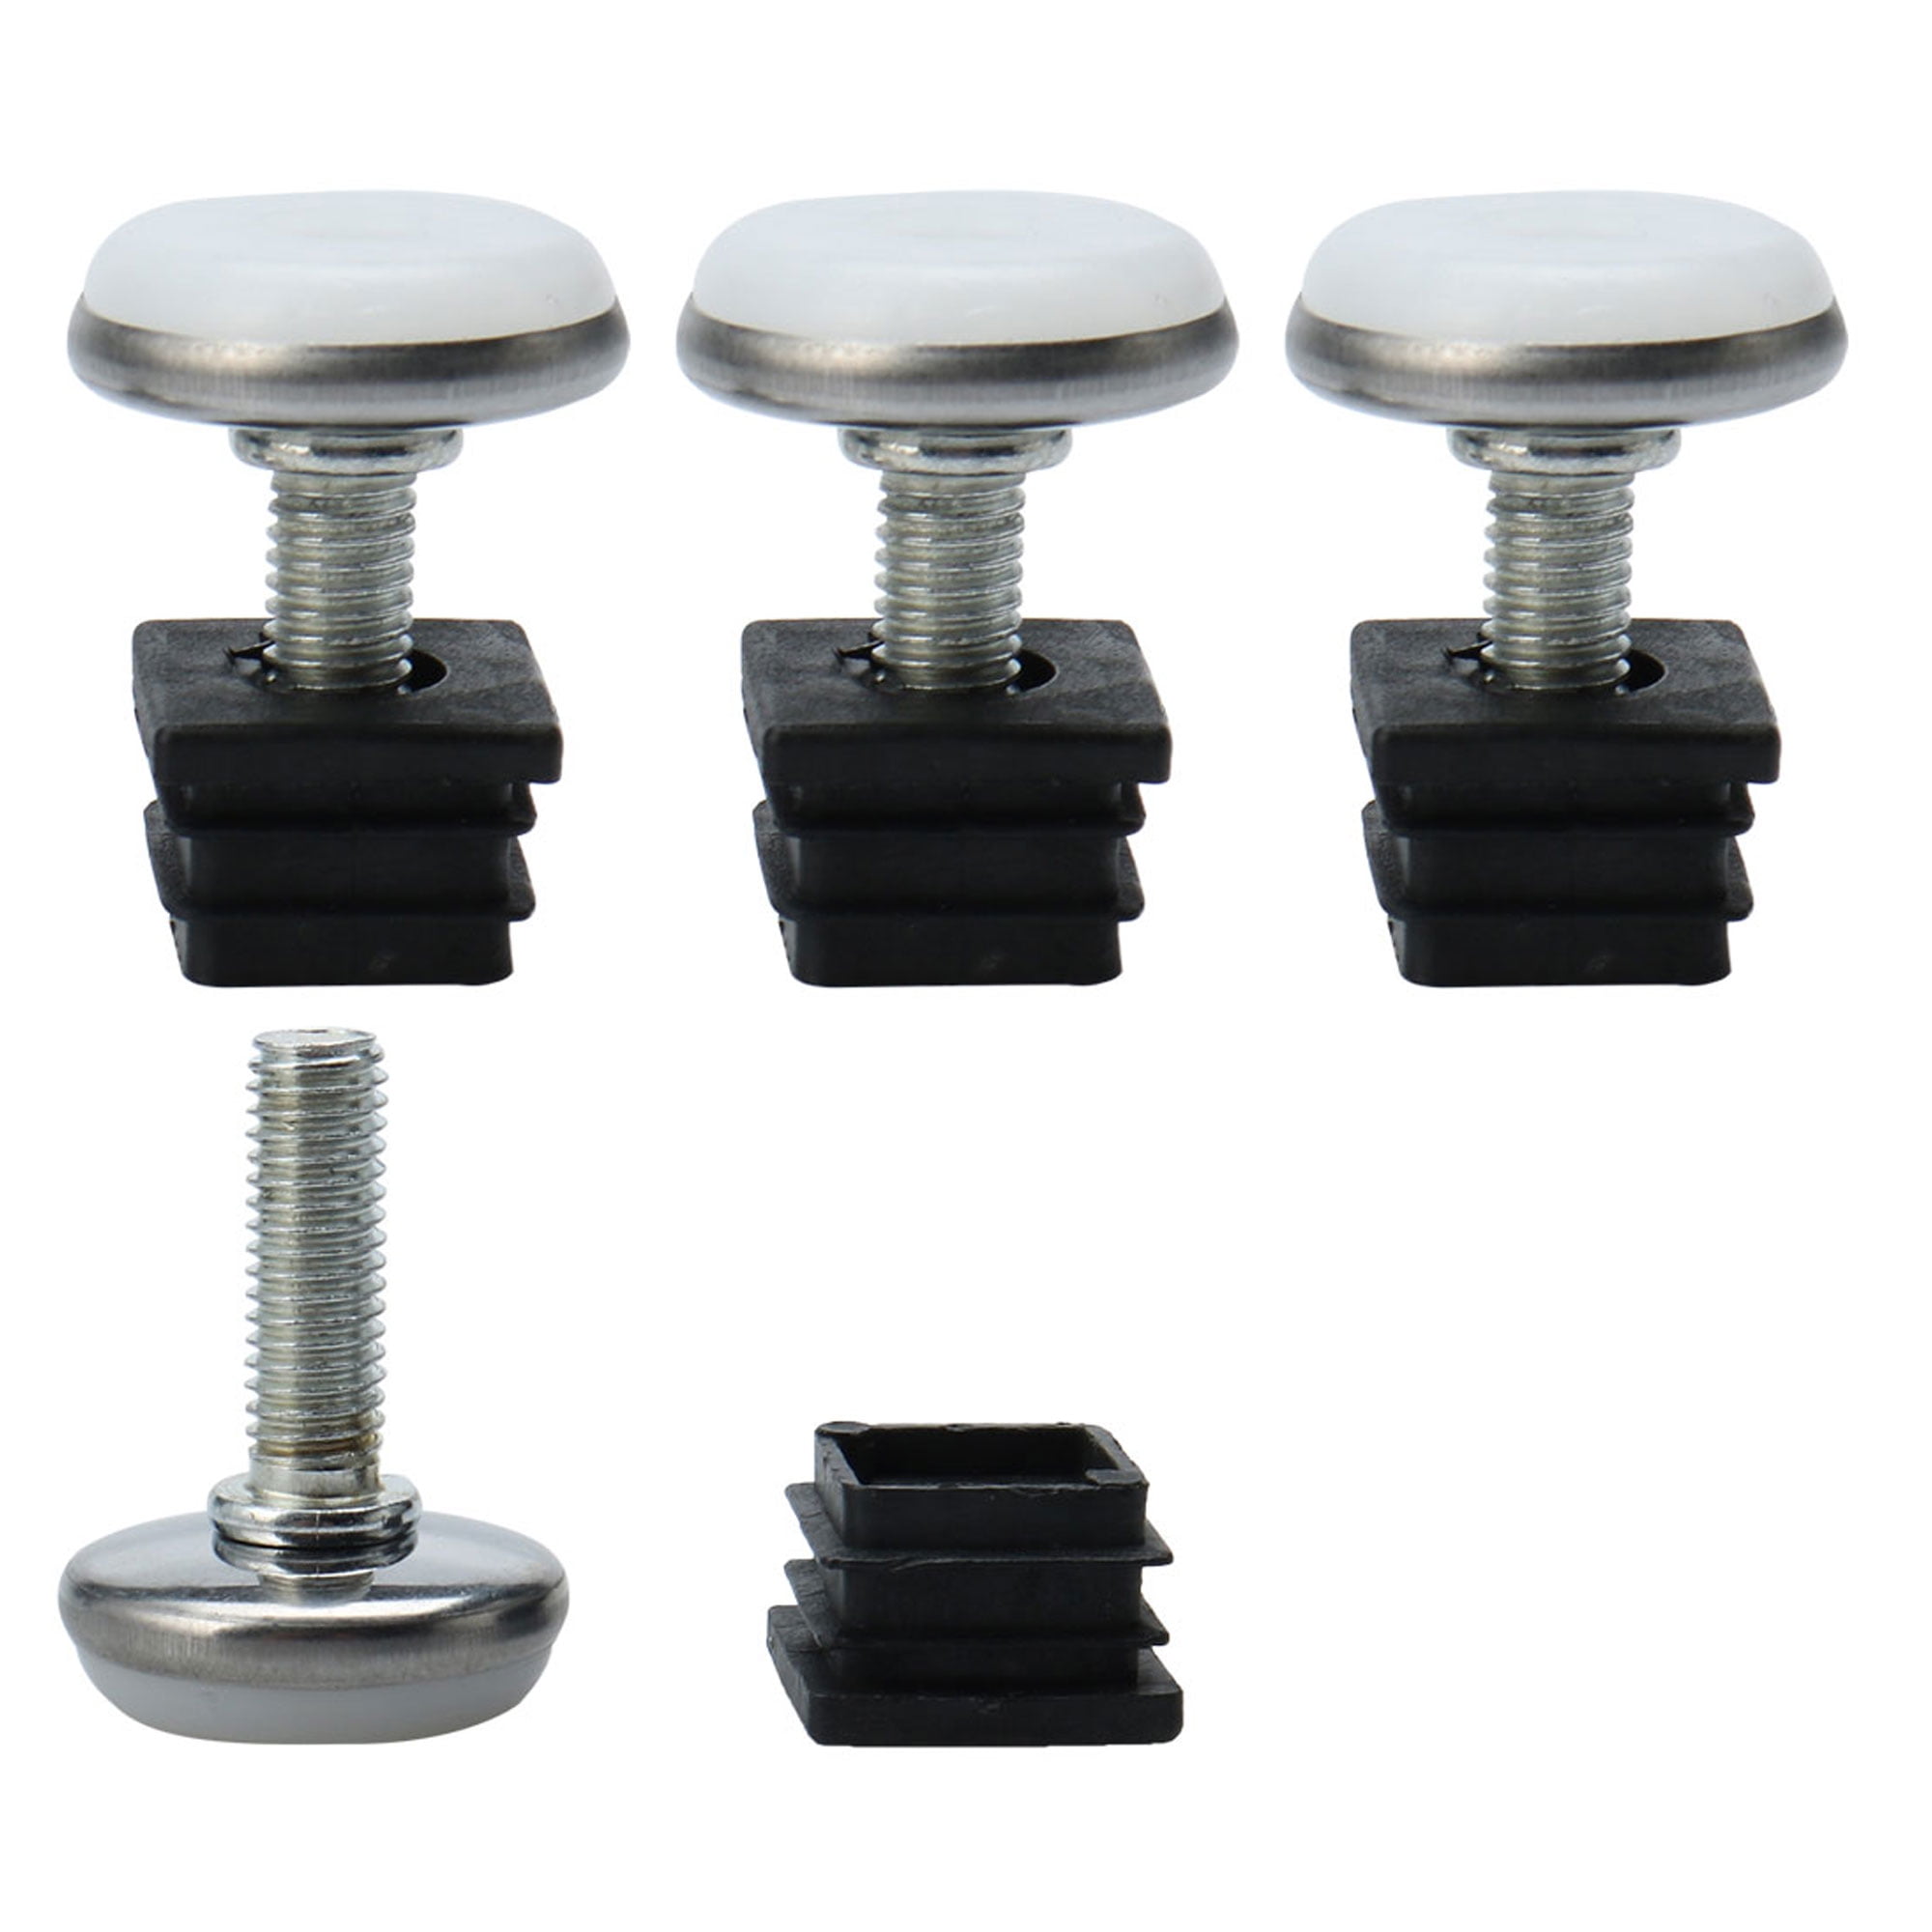 Leveling foot. Screw Adjustable foot m10 40mm. 4 X 35 mm Push Fit Square Table Legs Adjustable Levelling Screw feet foot Inserts Poland Franke. Kit for Kit мебельная фурнитура. Screw Adjustable foot.